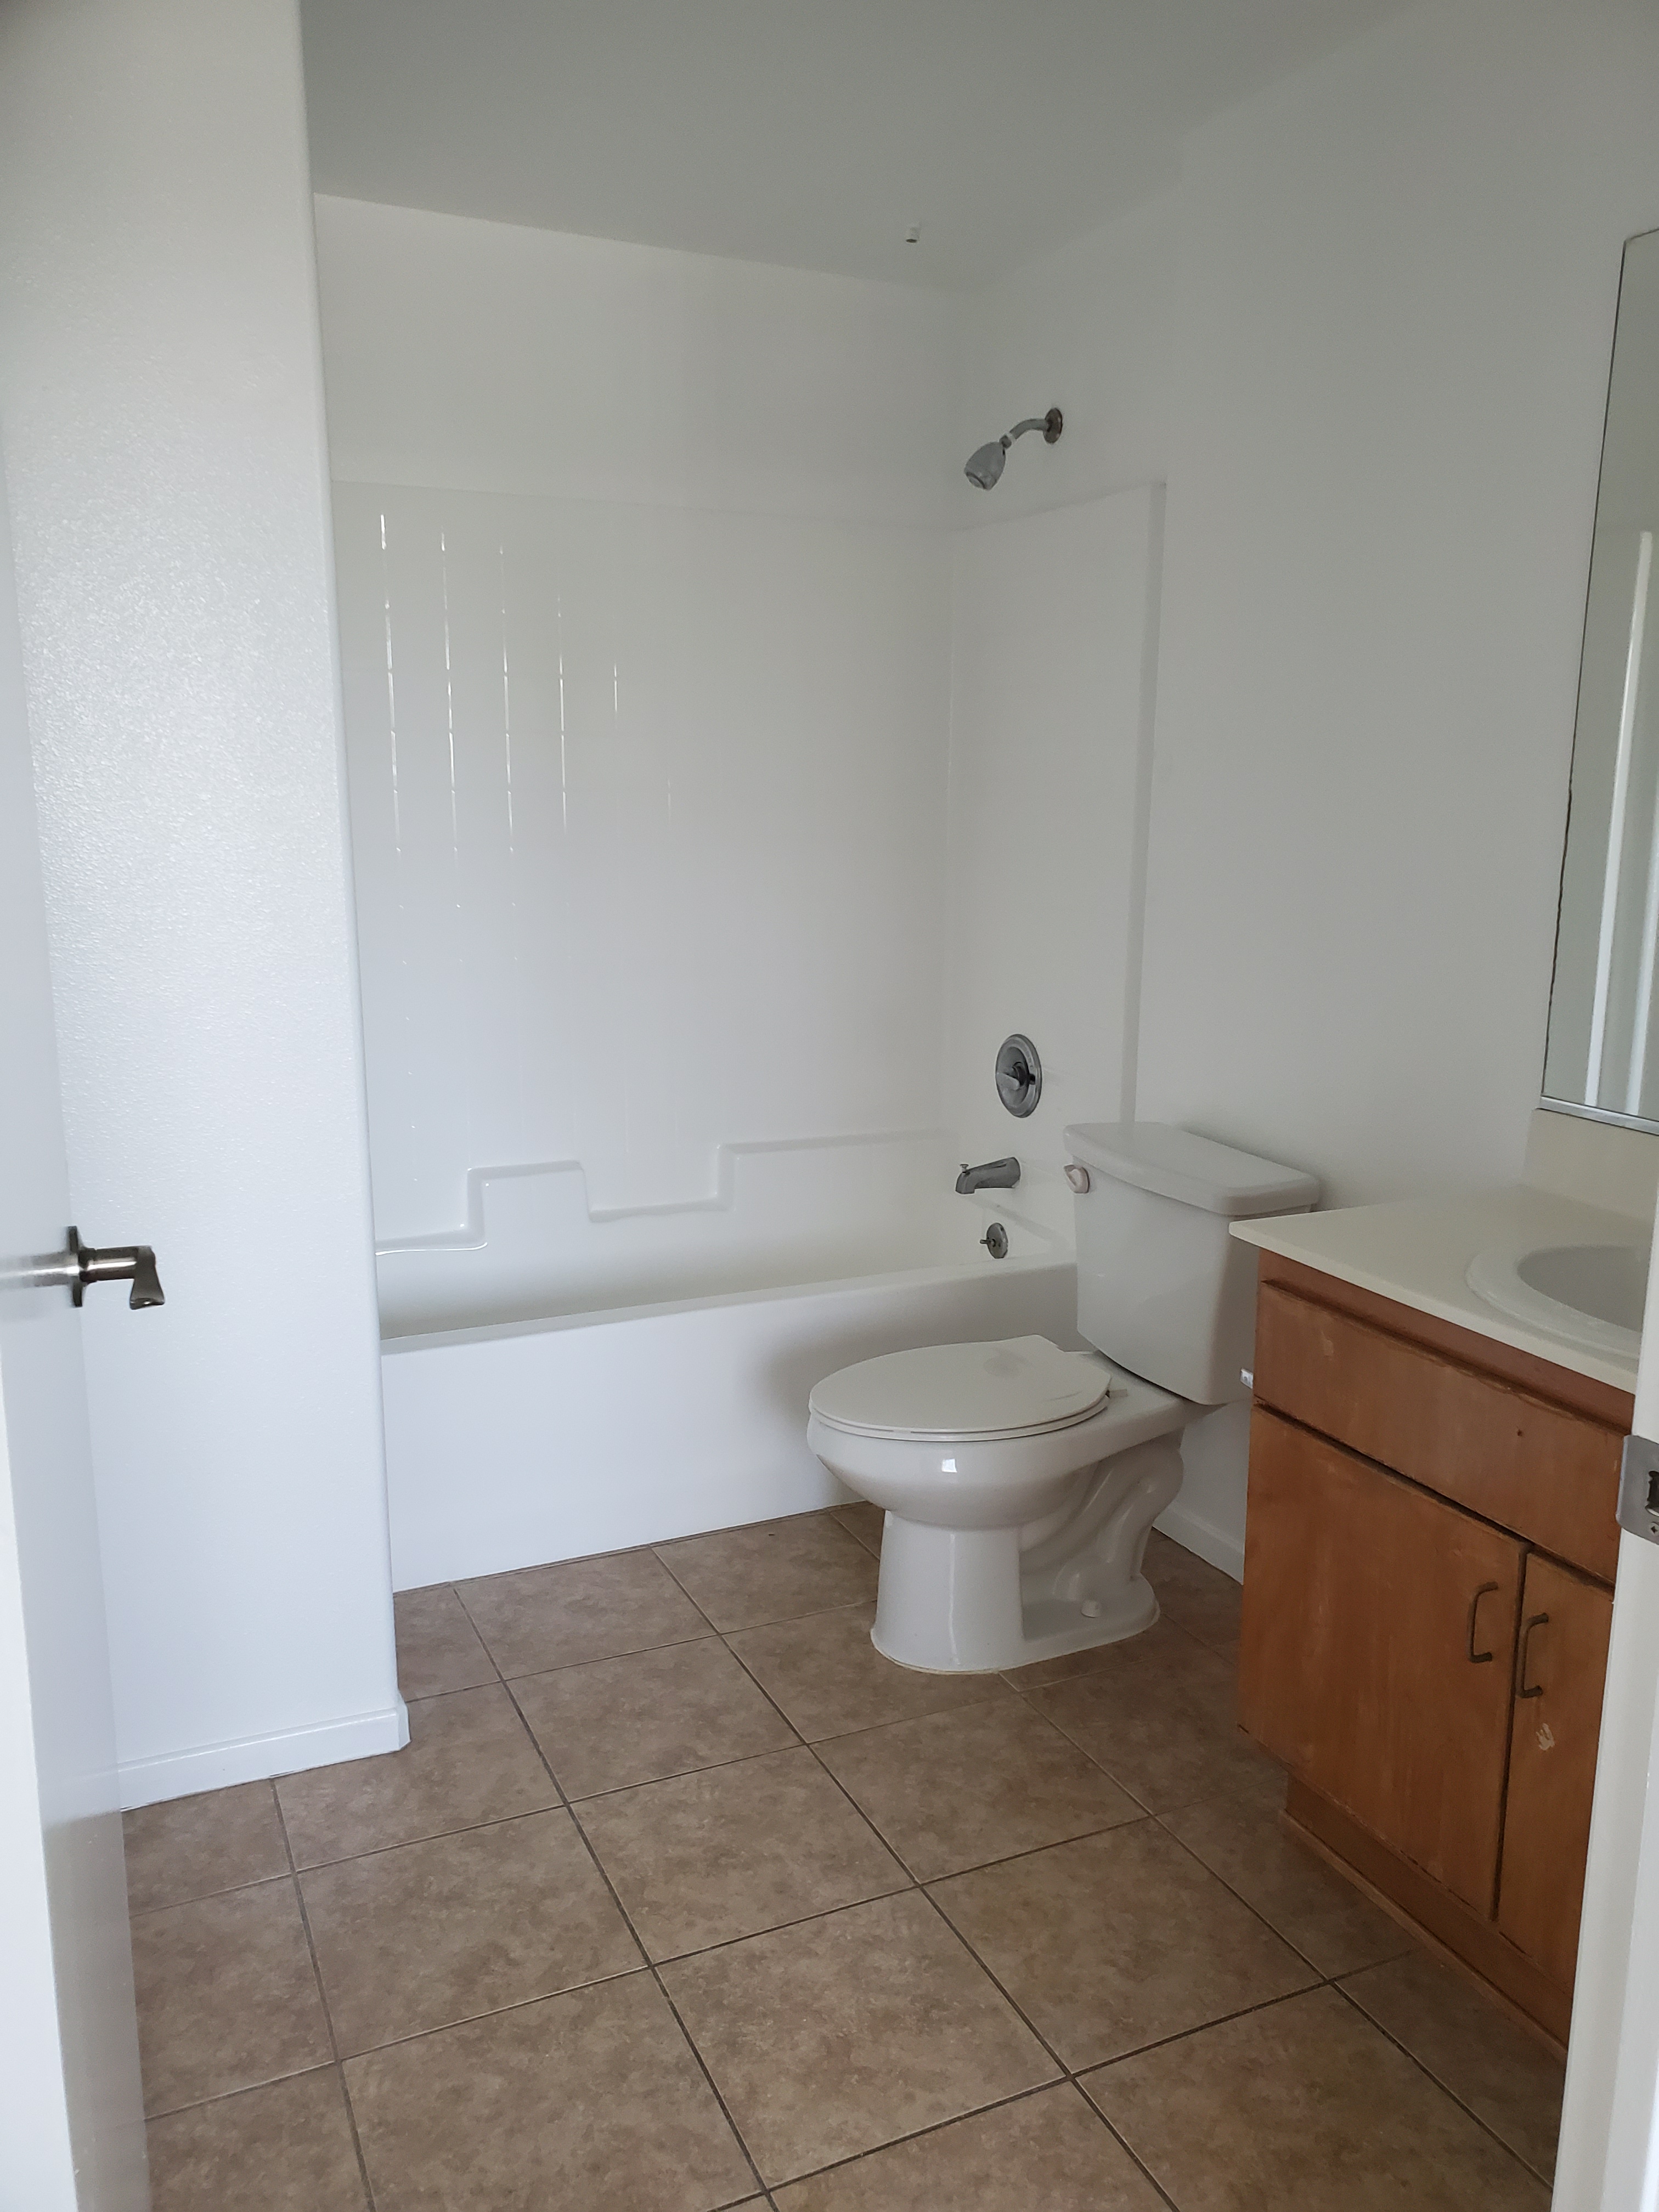 Bathroom with sink, cabinet, and shower bath with fixed head